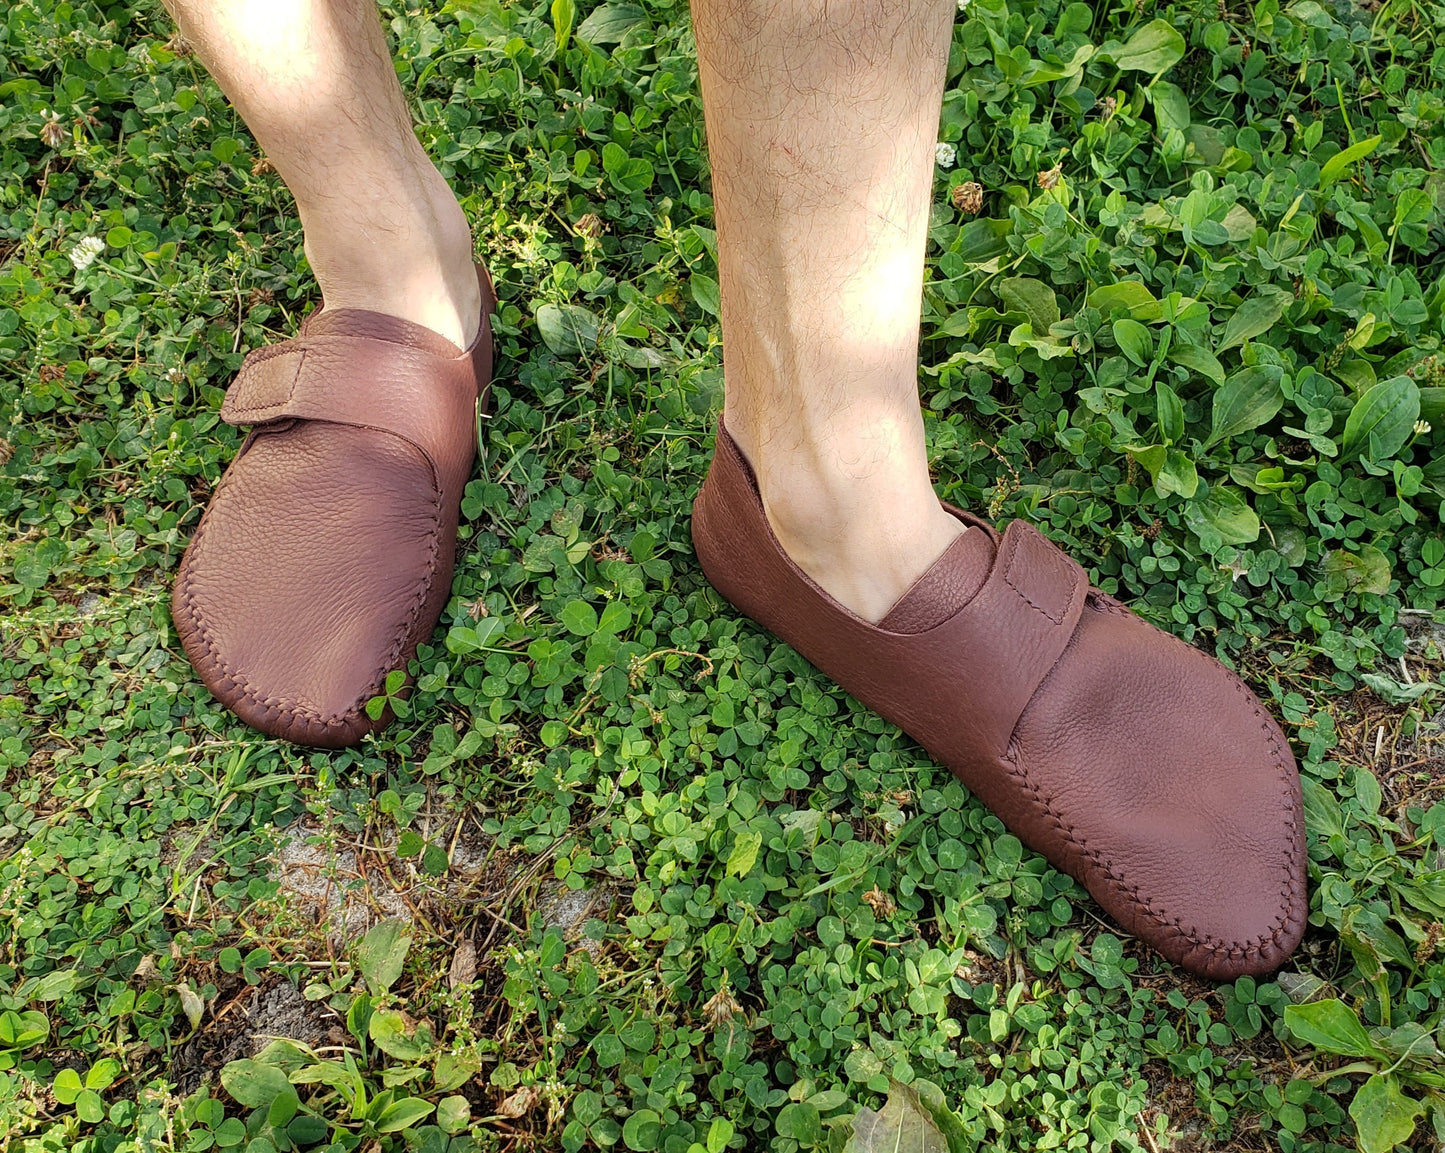 The "Runners" Moccasins with Velcro / Custom-Made Barefoot Shoes